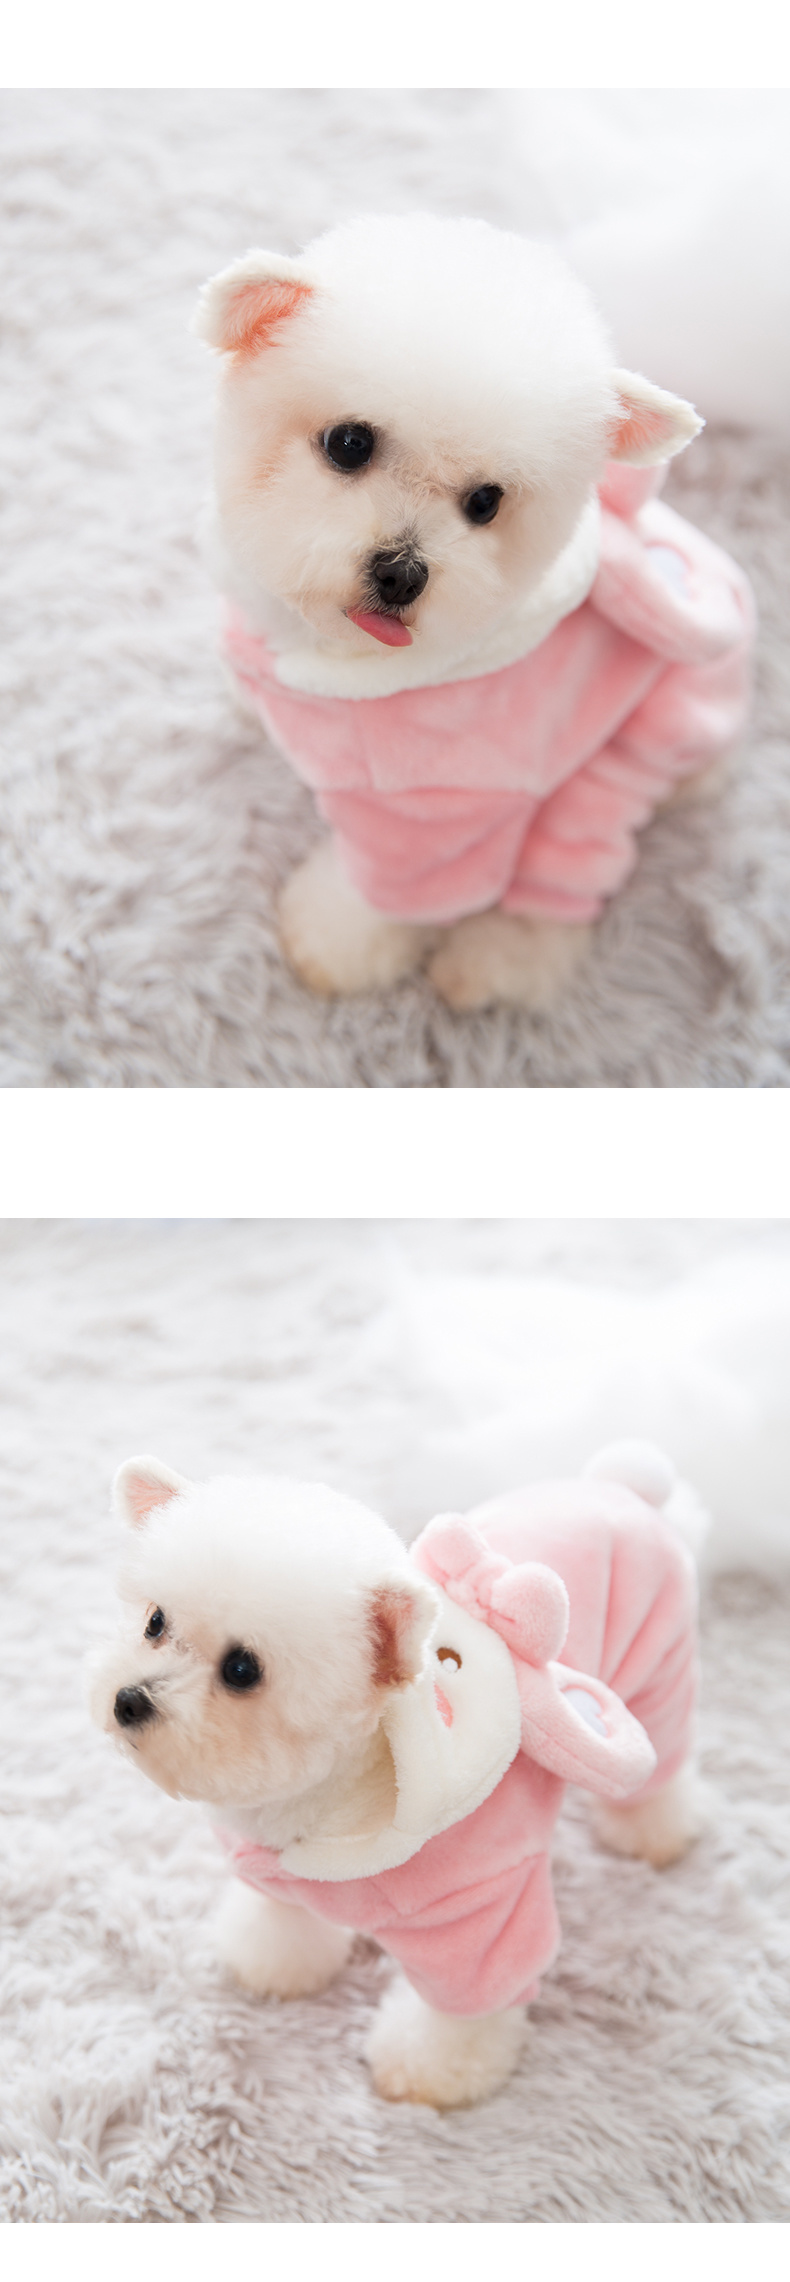 Pet Warm Soft Clothes for Dog and Cat